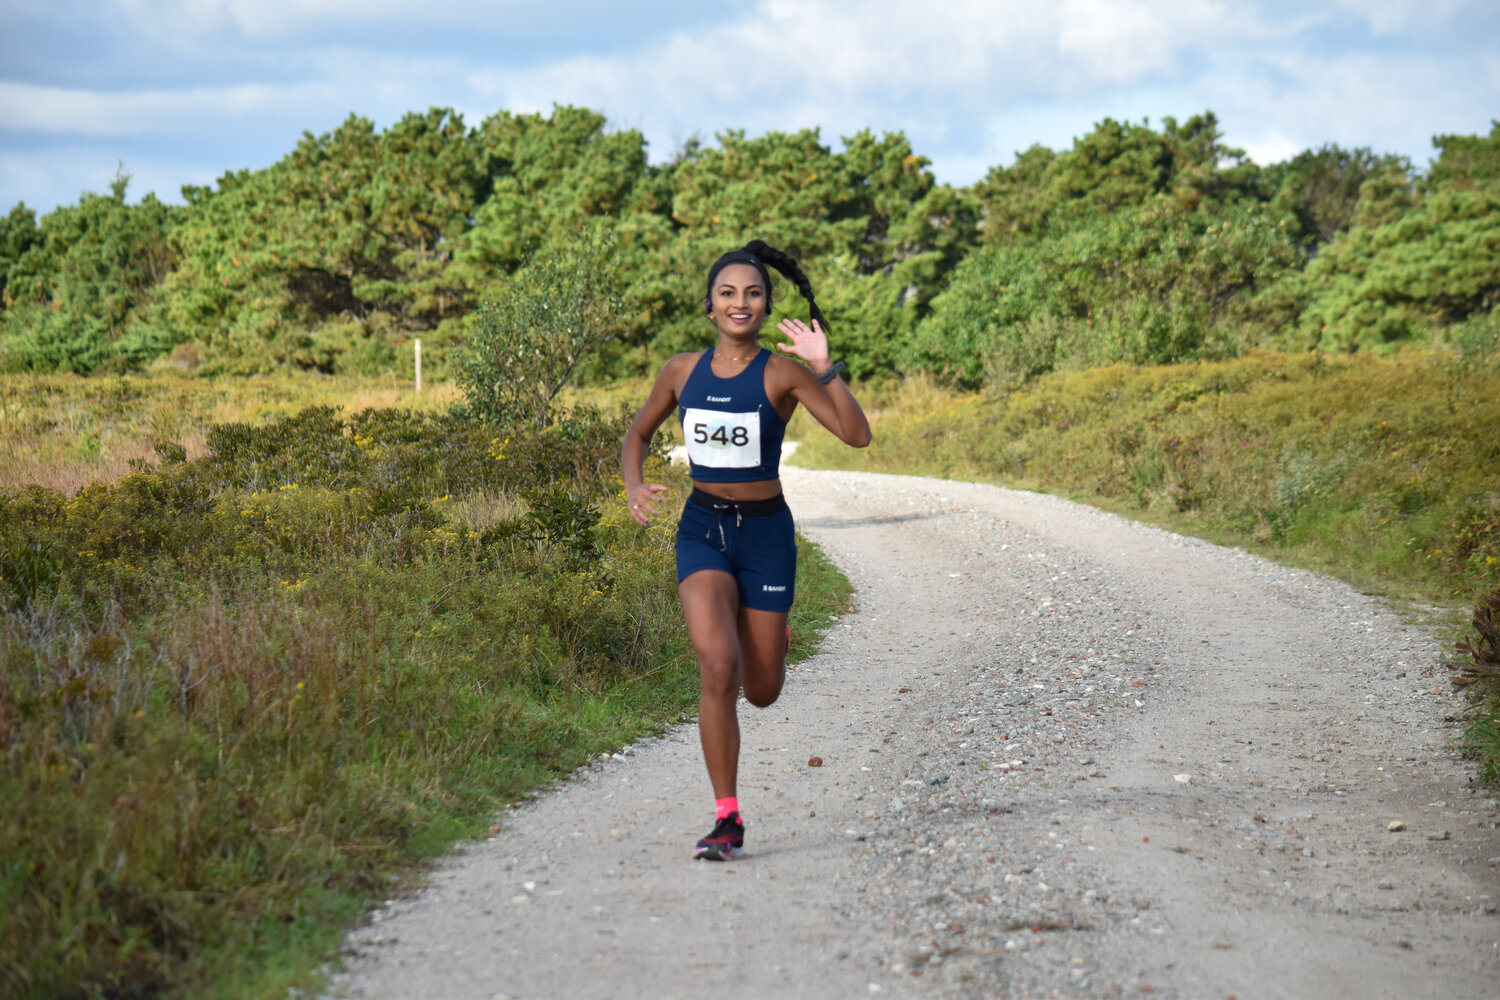 Sunday's Nantucket Half Marathon and 10K featured about 500 runners making their way through the Smooth Hummocks Coastal Preserve.